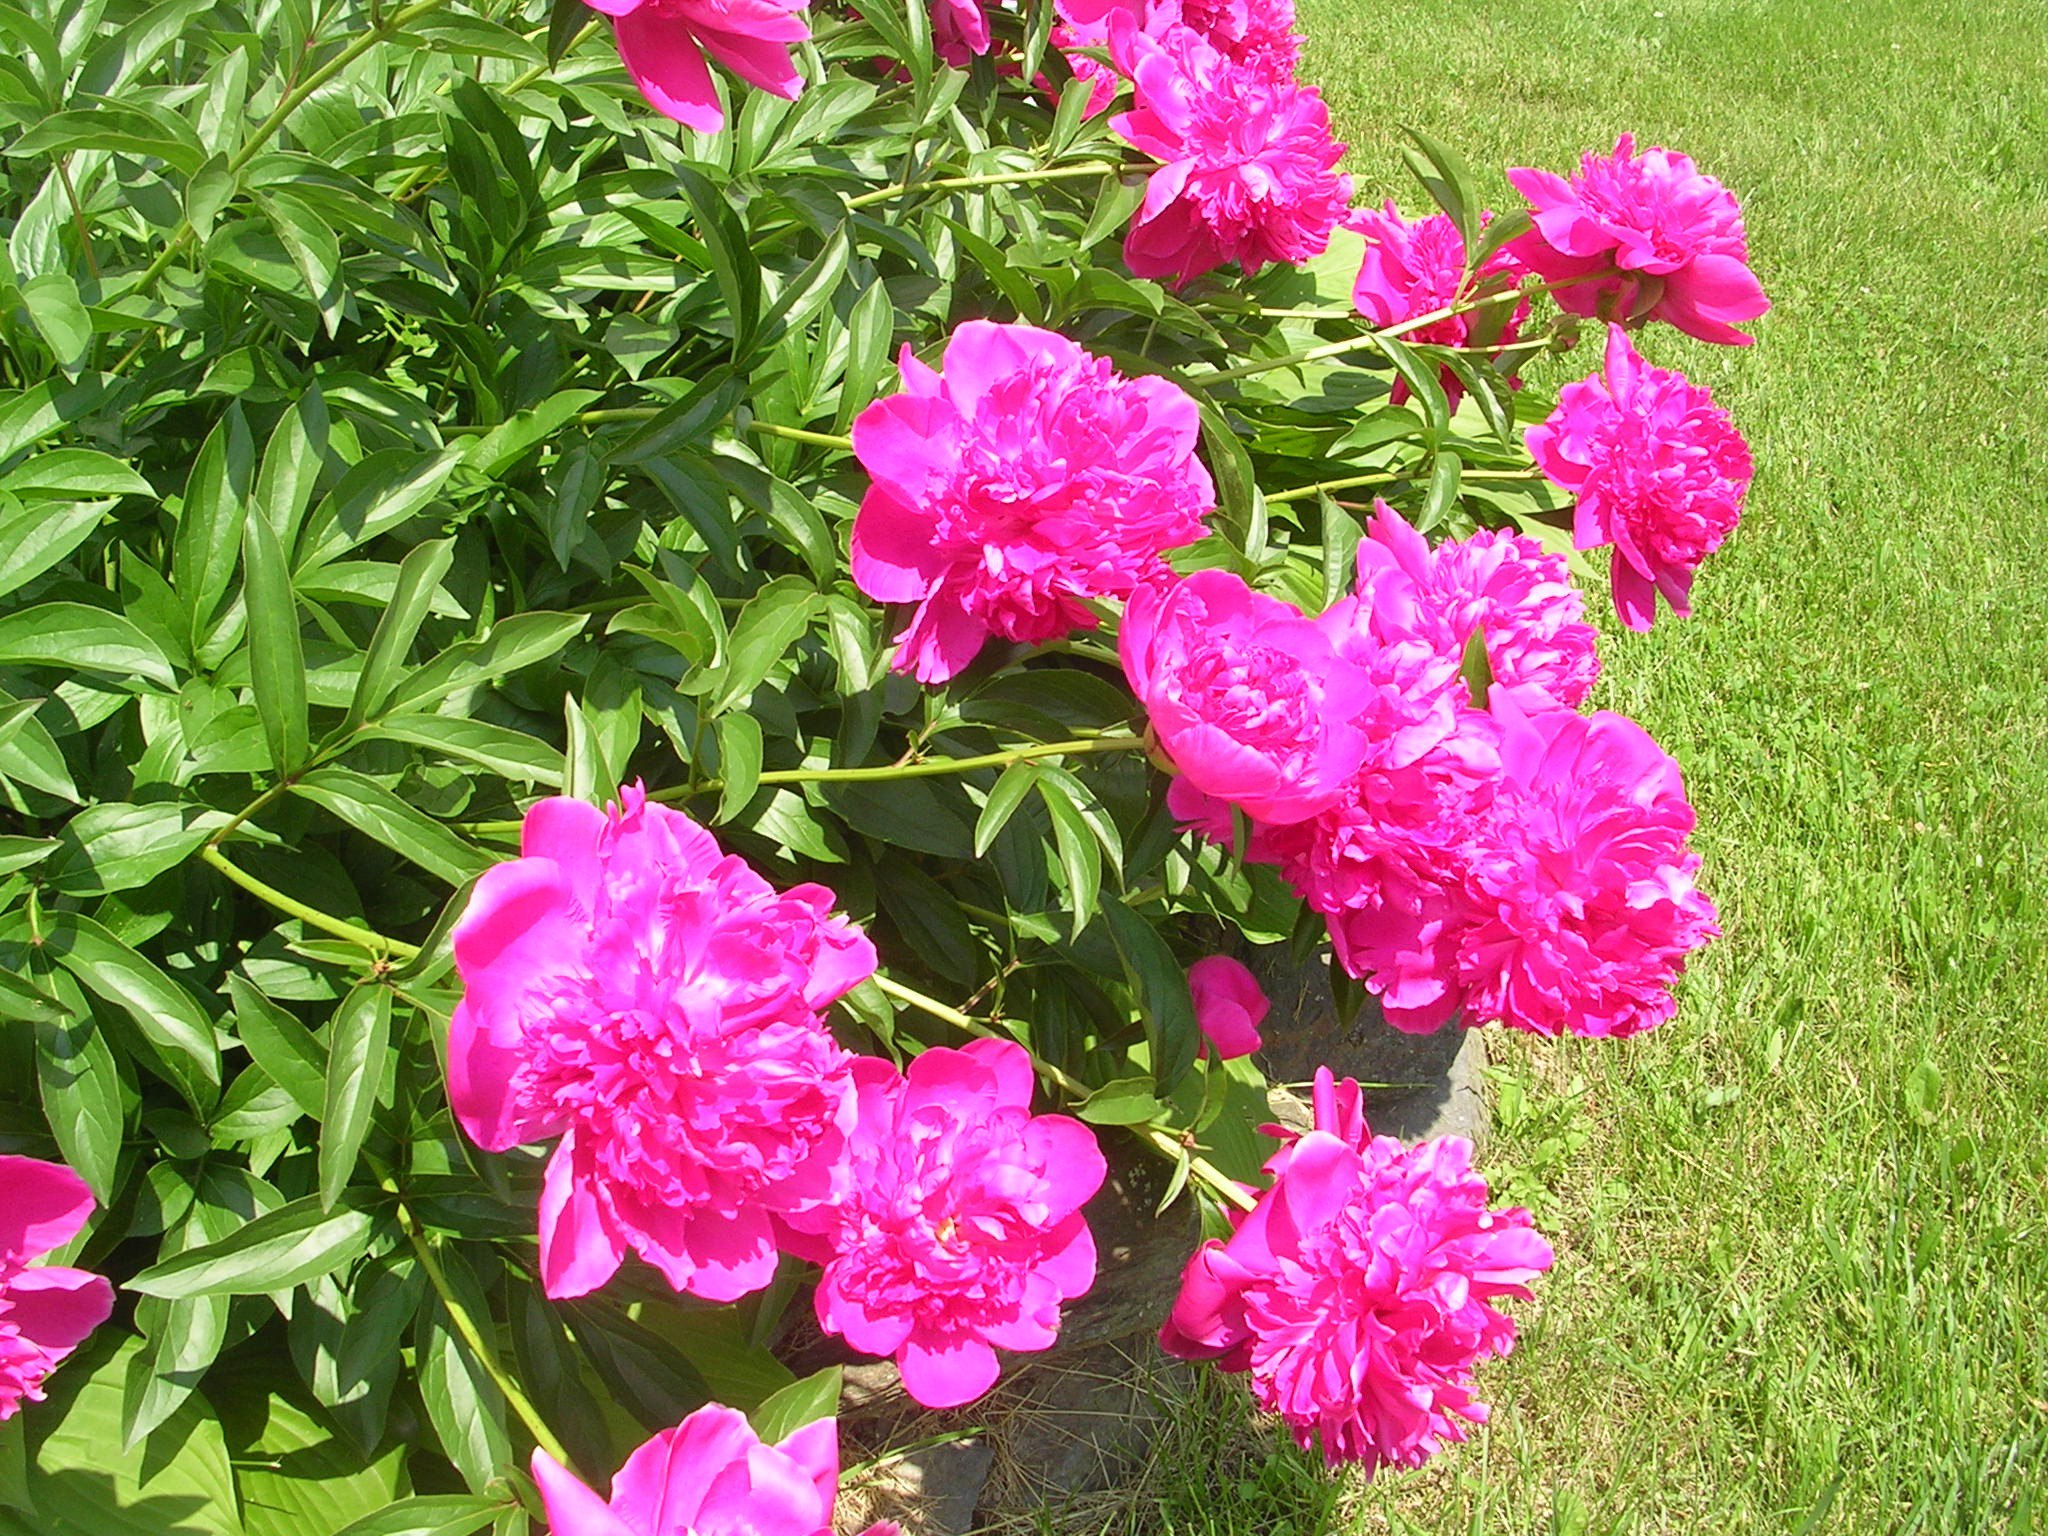 How To Grow Peonies Growing And Caring For Peonies